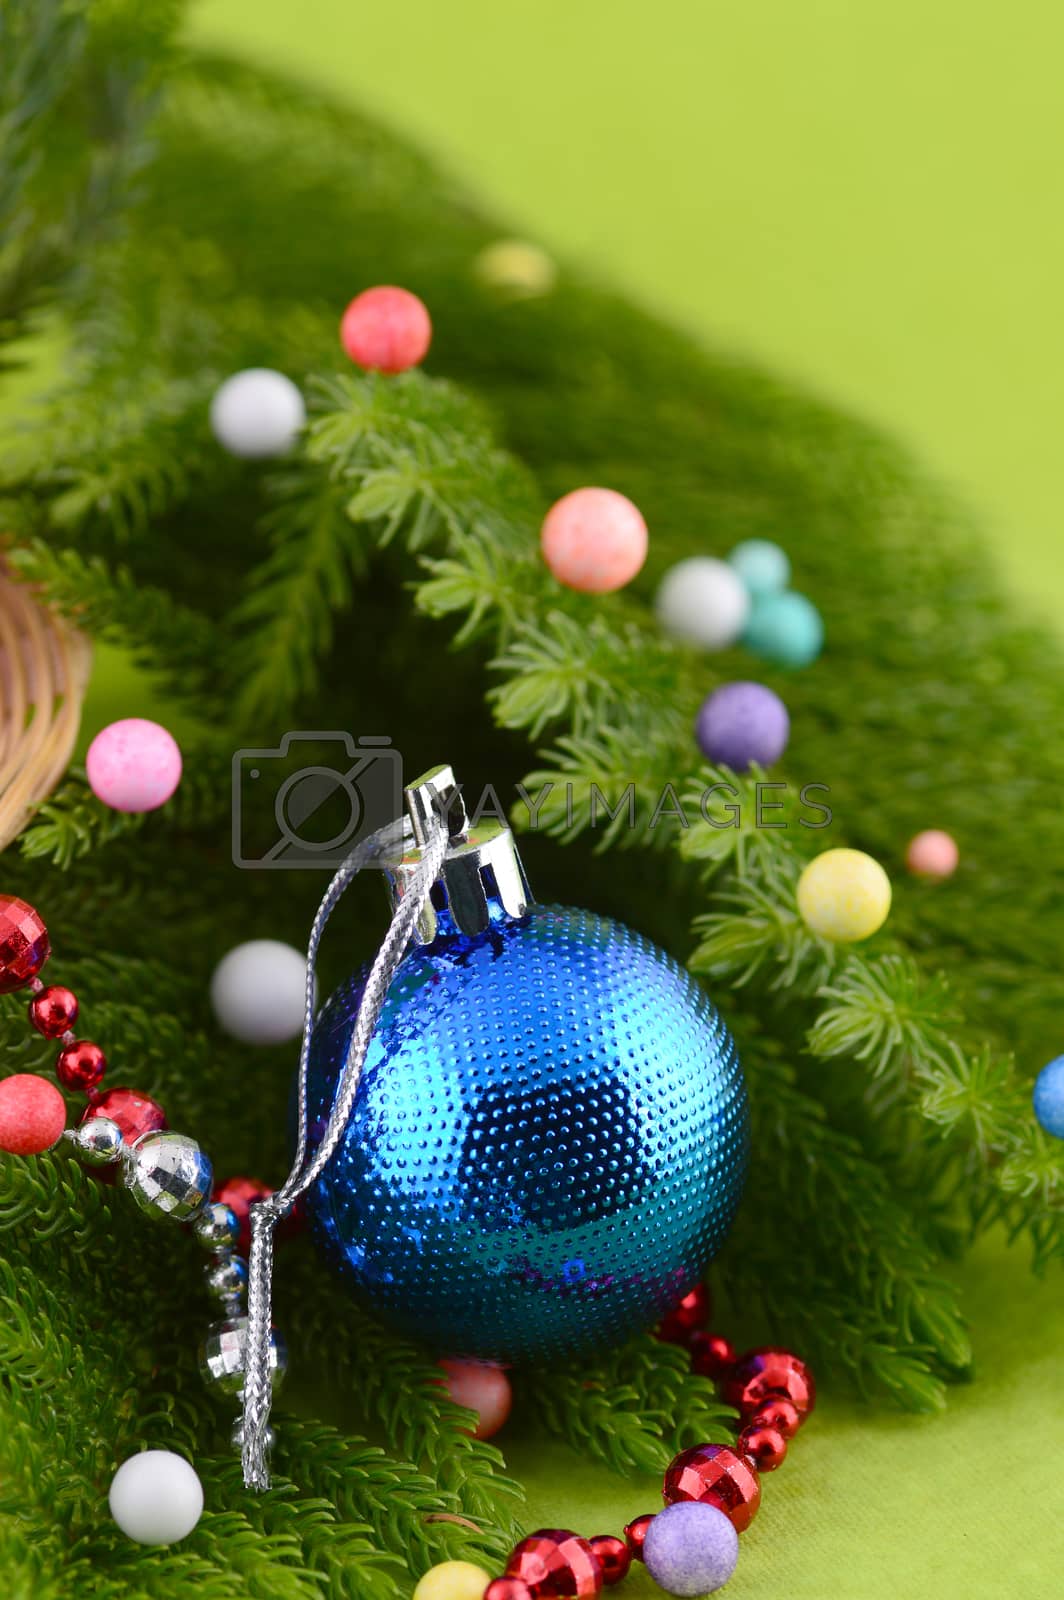 Royalty free image of Christmas Decoration: Christmas ball and ornaments with the branch of Christmas tree by DipakShelare